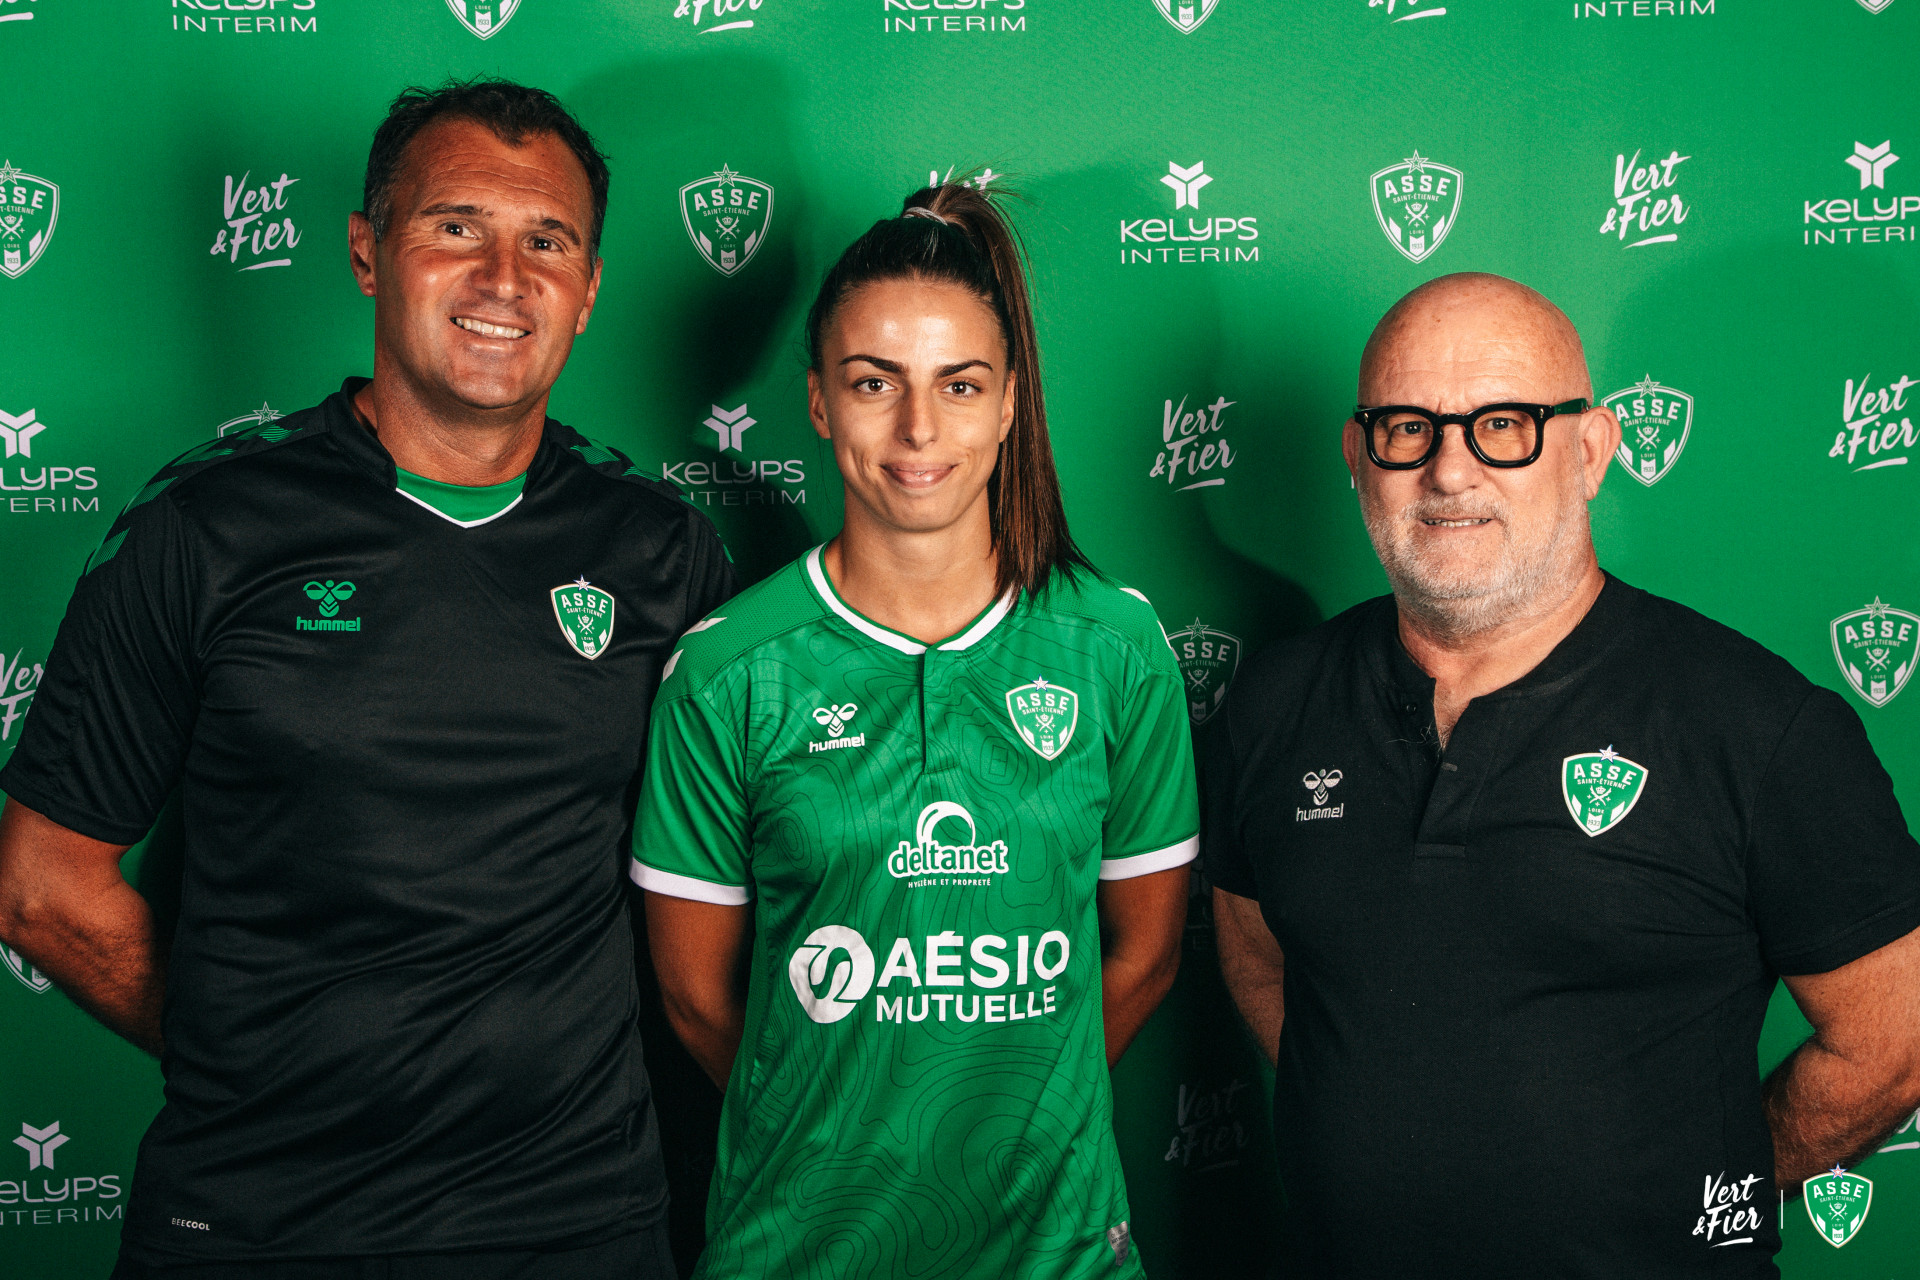 Anaëlle Anglais has signed for Saint-Etienne!